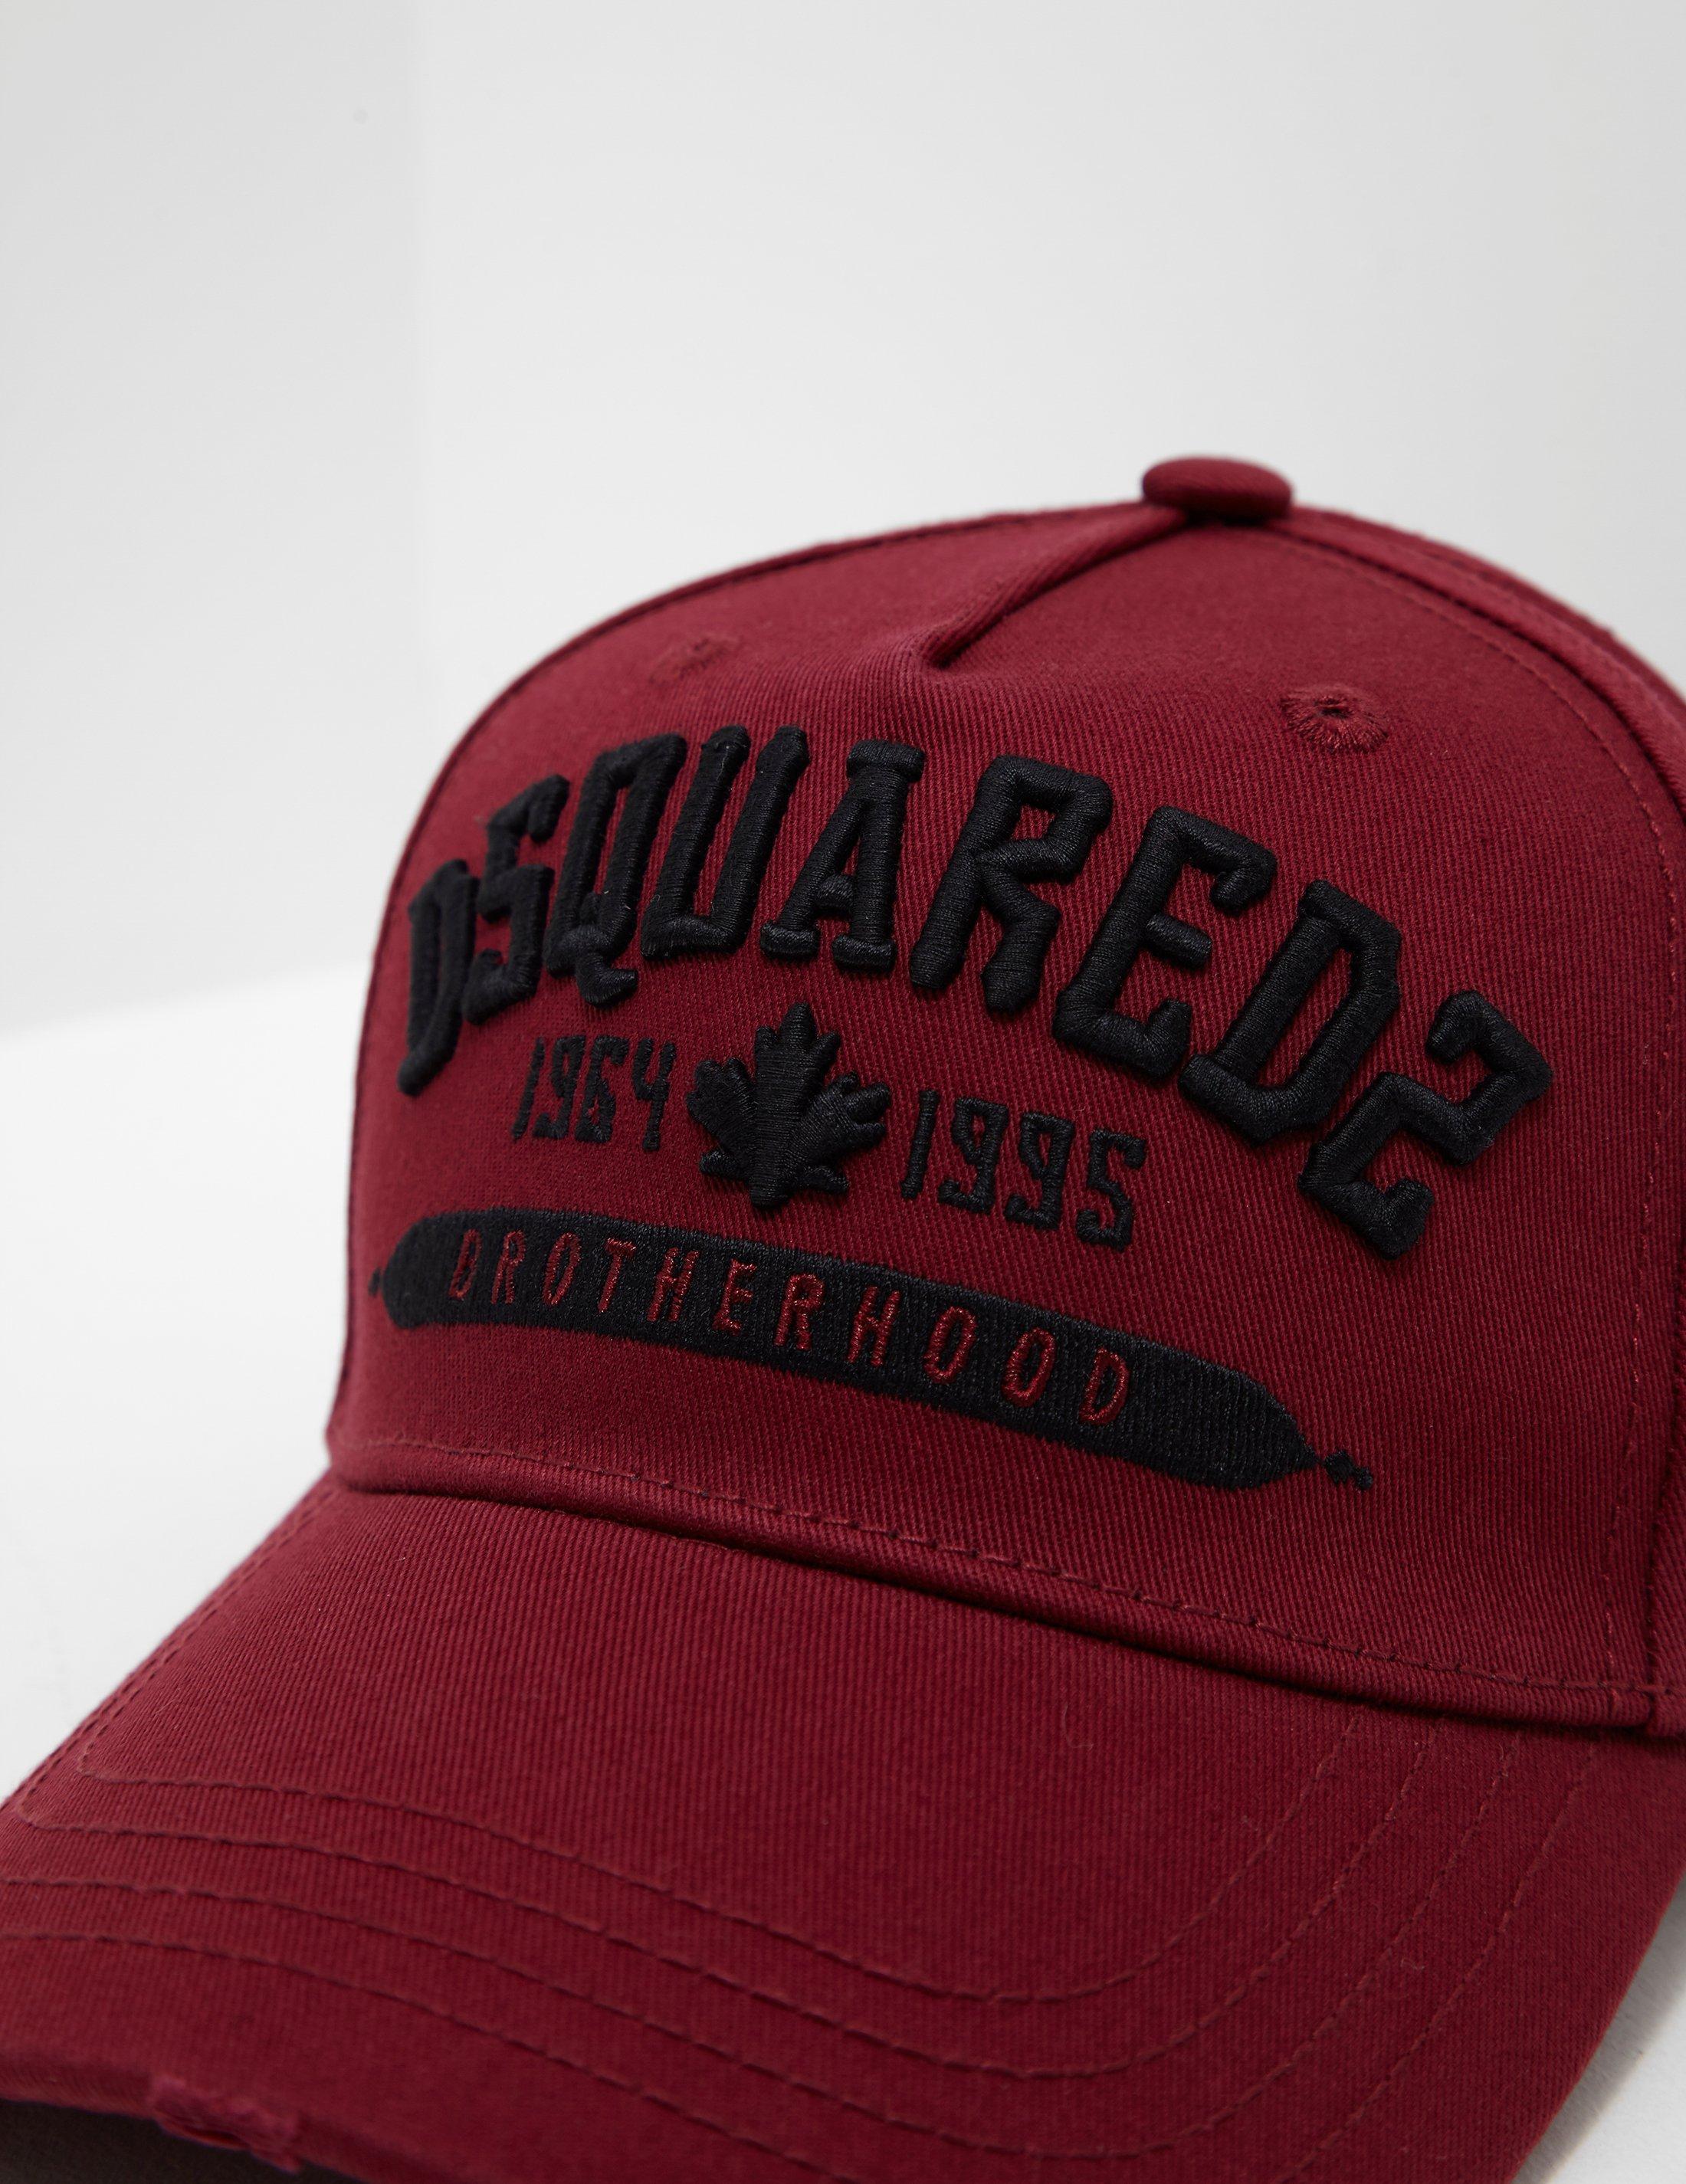 DSquared² Cotton Mens Brotherhood Cap in Red for Men - Lyst